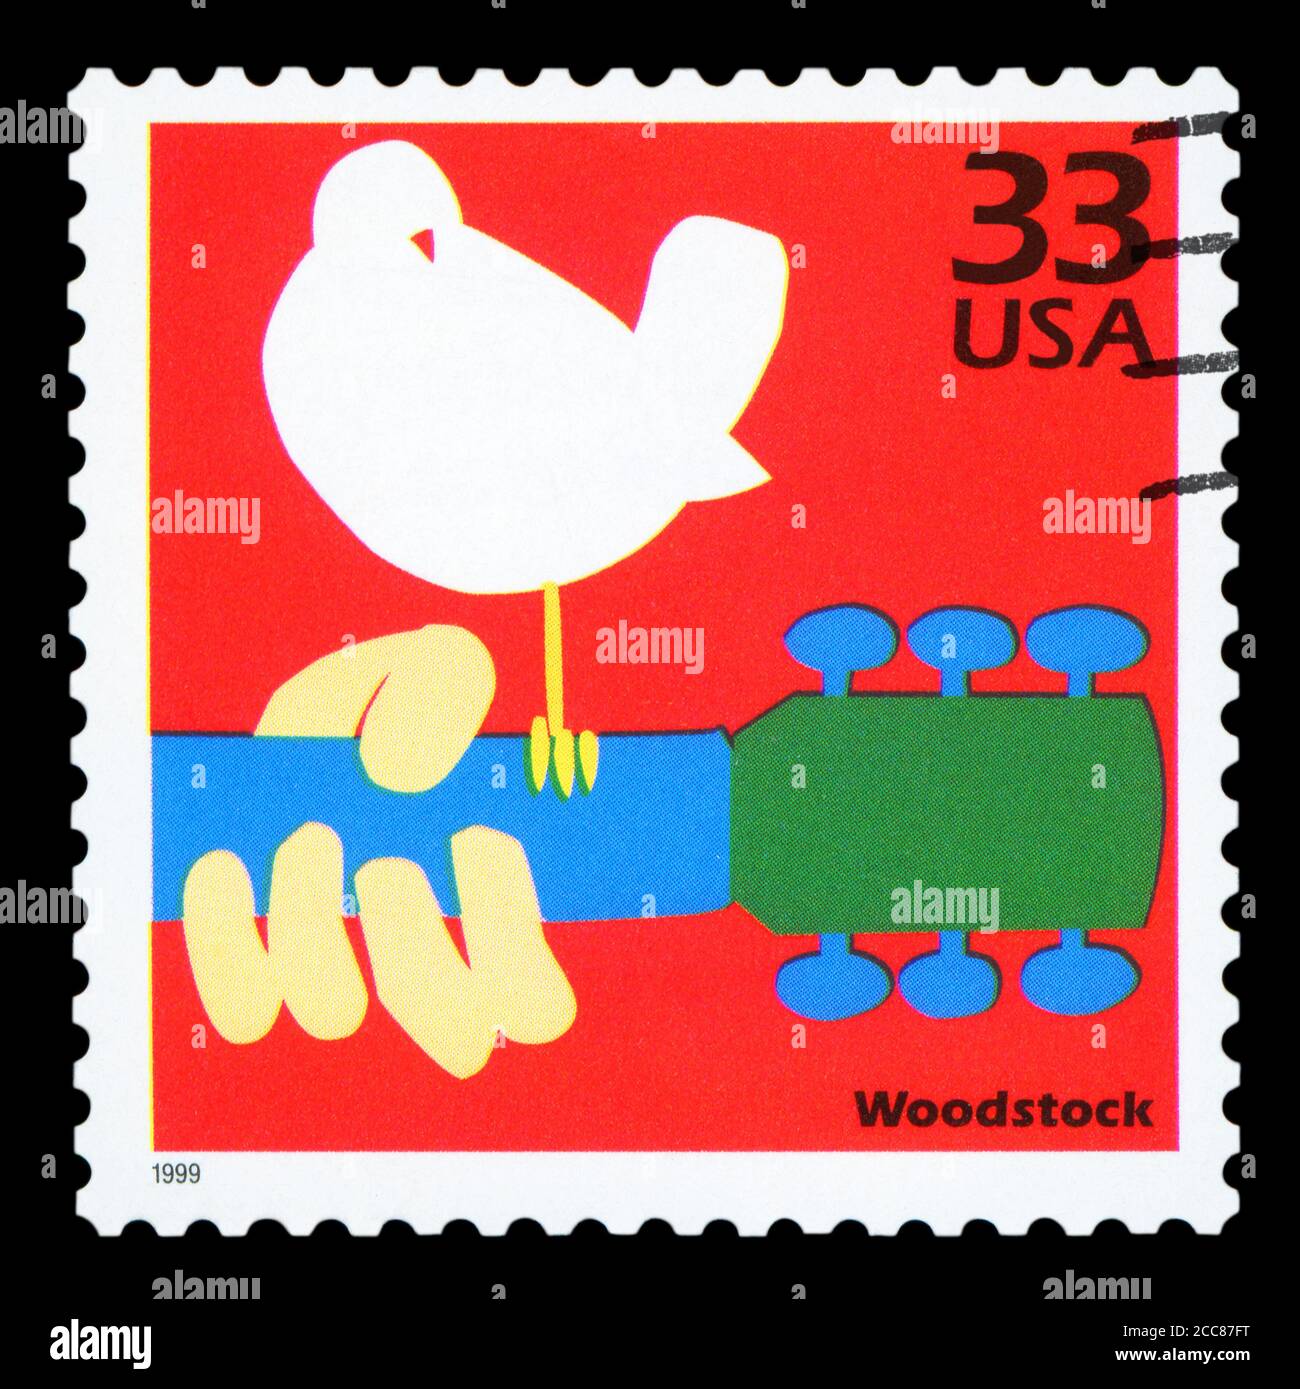 UNITED STATES OF AMERICA - CIRCA 1999: Stamp printed in USA dedicated to celebrate the century 1960s, shows Woodstock, circa 1999 Stock Photo